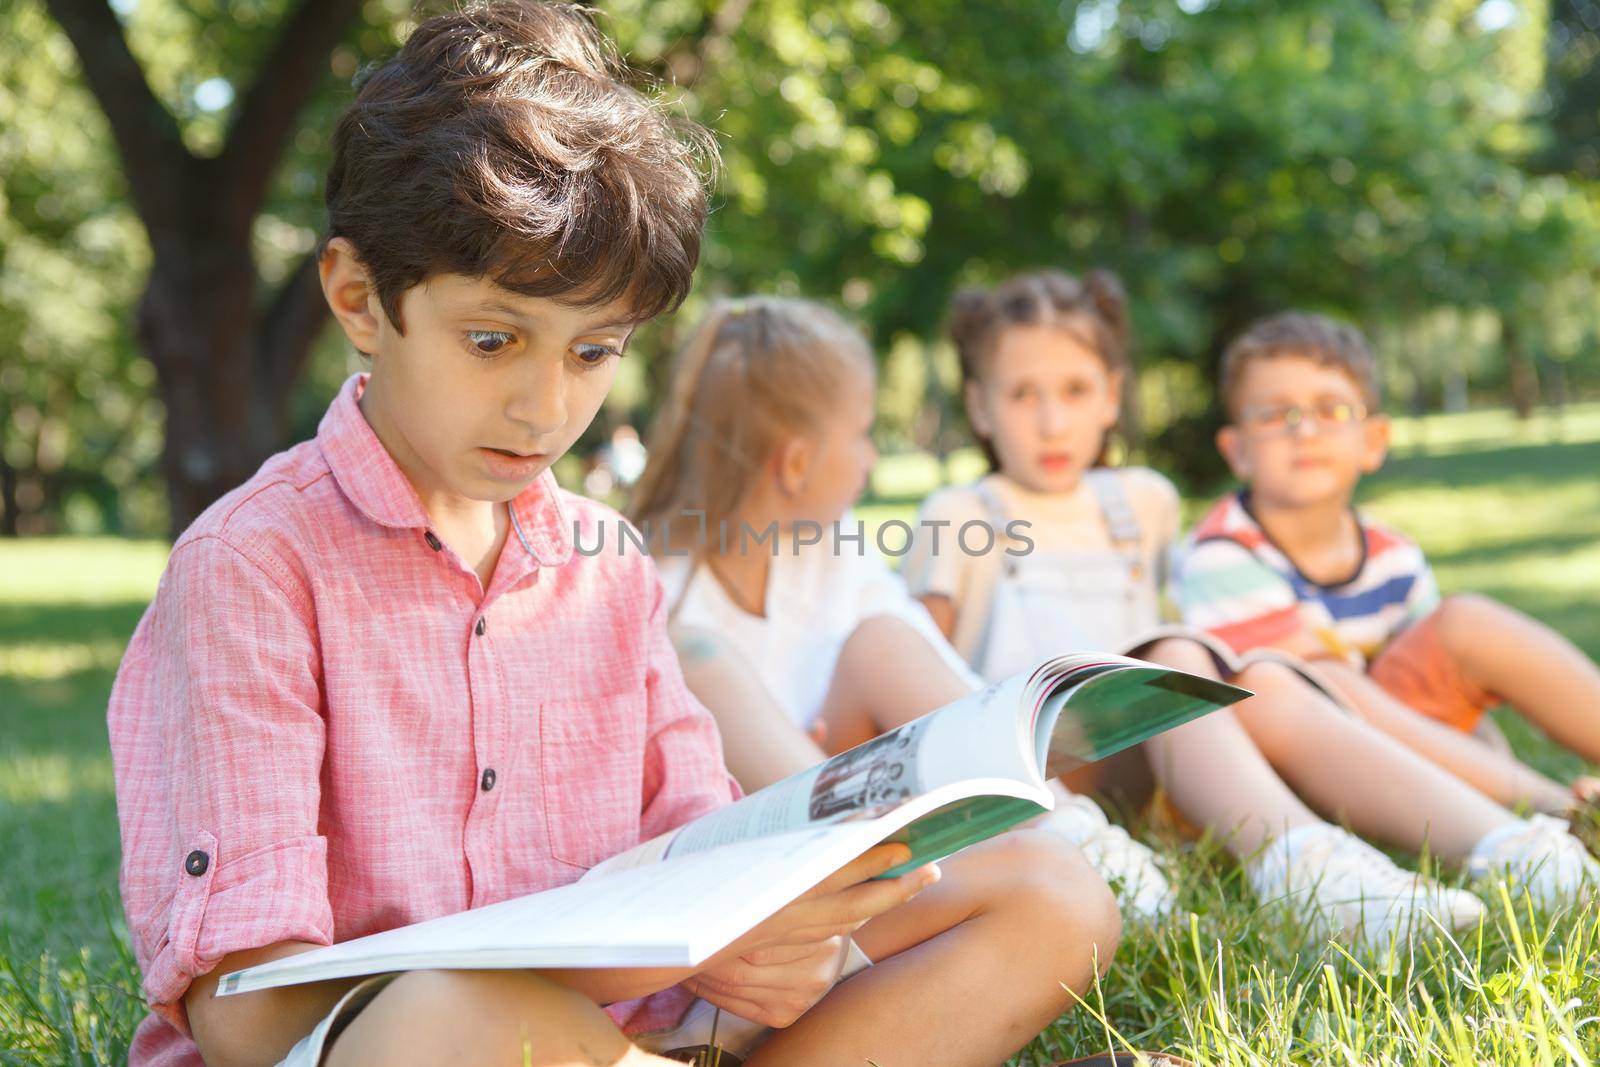 Cute little boy looking overwhelmed, reading a book at public park